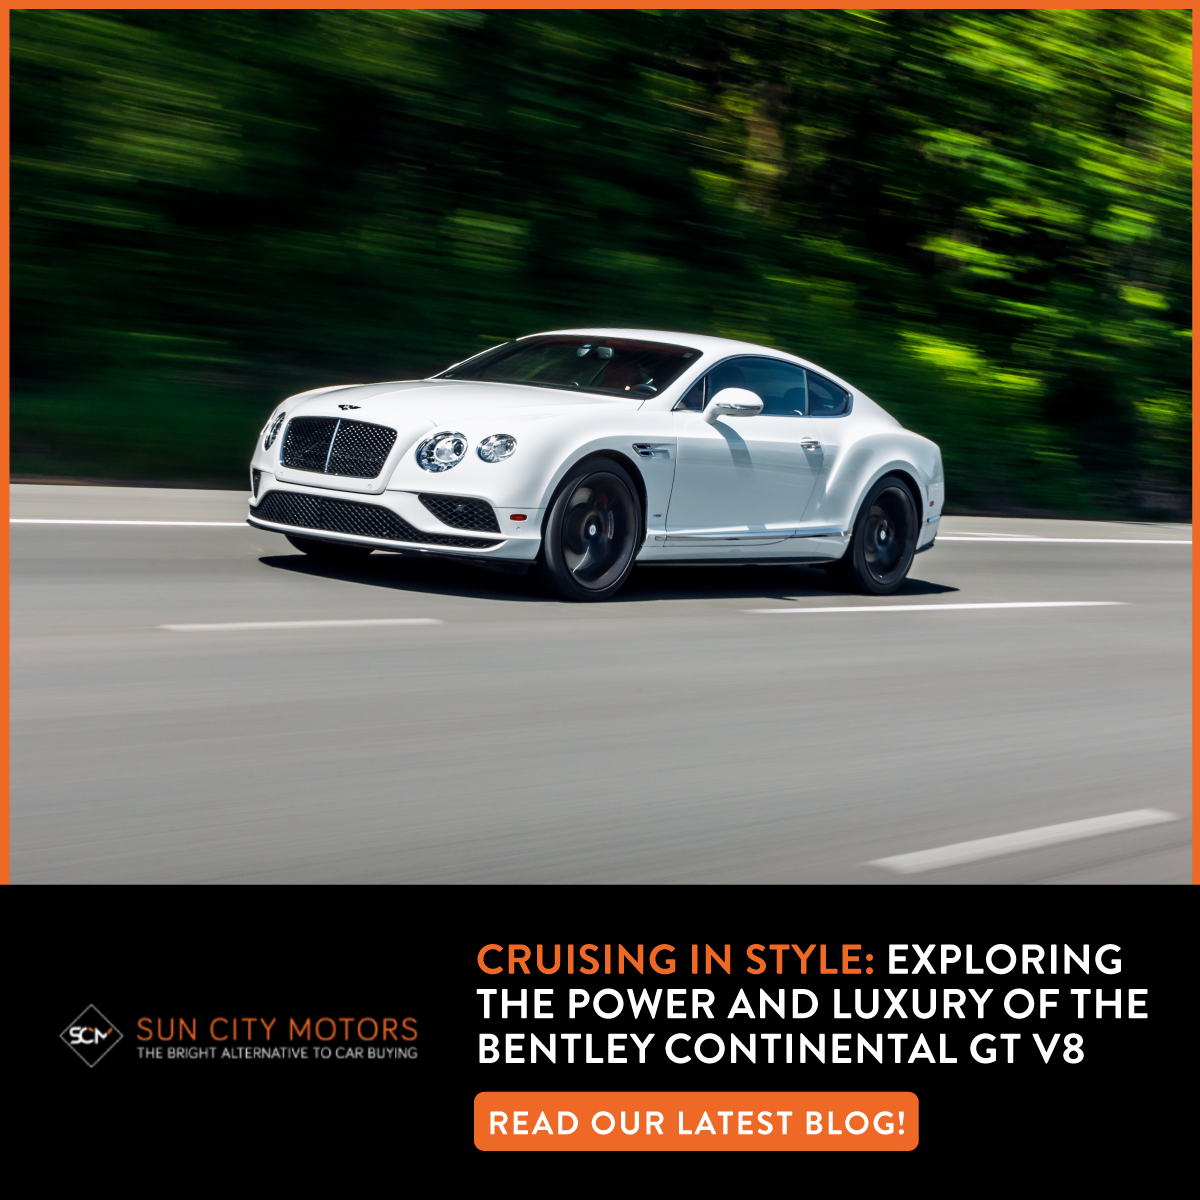 Cruising in Style: Exploring the Power and Luxury of the Bentley Continental GT V8